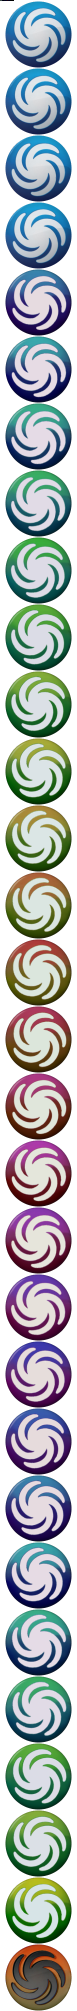 Spore Rotate Tinted.png